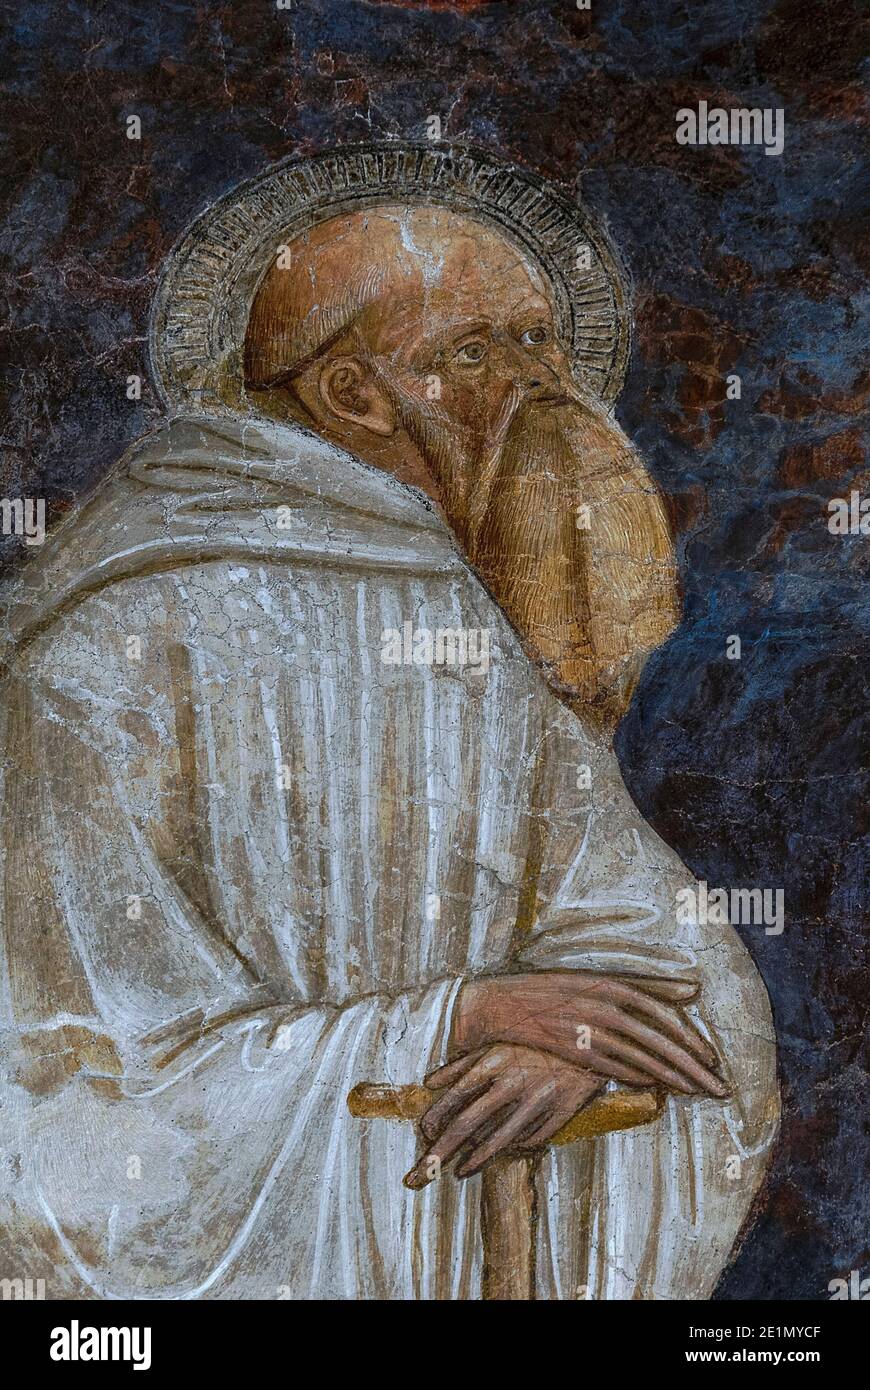 Saint Romuald or San Romualdo, founder in the 1000s of the Camaldolese monastic order.  Detail of 1400s Crucifixion fresco, attributed to Florentine Late Gothic and Renaissance artist Stefano d’Antonio di Vanni (c. 1405-1483), a pupil of painter and sculptor Bicci di Lorenzo (1373-1452).  In the Chiesa di Sant’Agostino in Volterra, Tuscany, Italy. Stock Photo